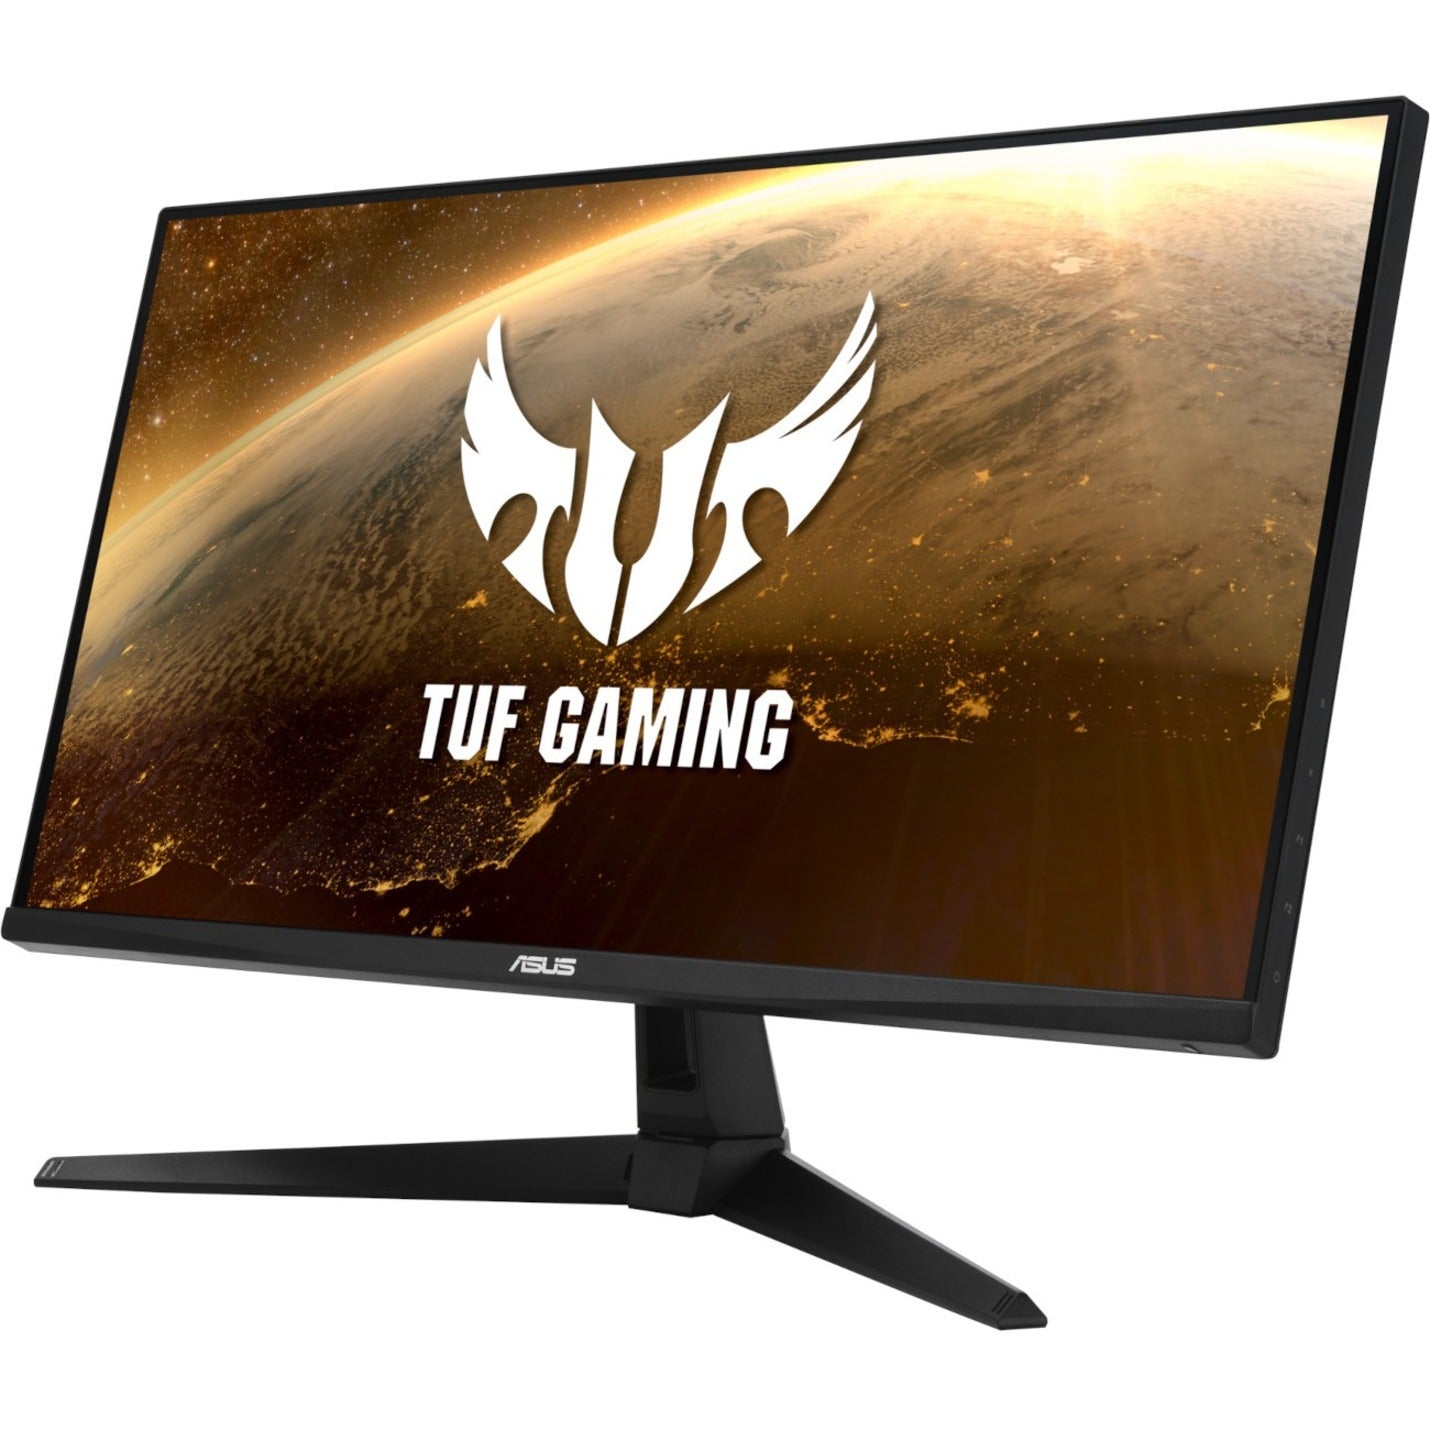 TUF VG289Q1A 28 4K UHD Gaming LCD Monitor - Immersive Gaming Experience, Adaptive Sync/FreeSync, 90% DCI-P3 Color Gamut